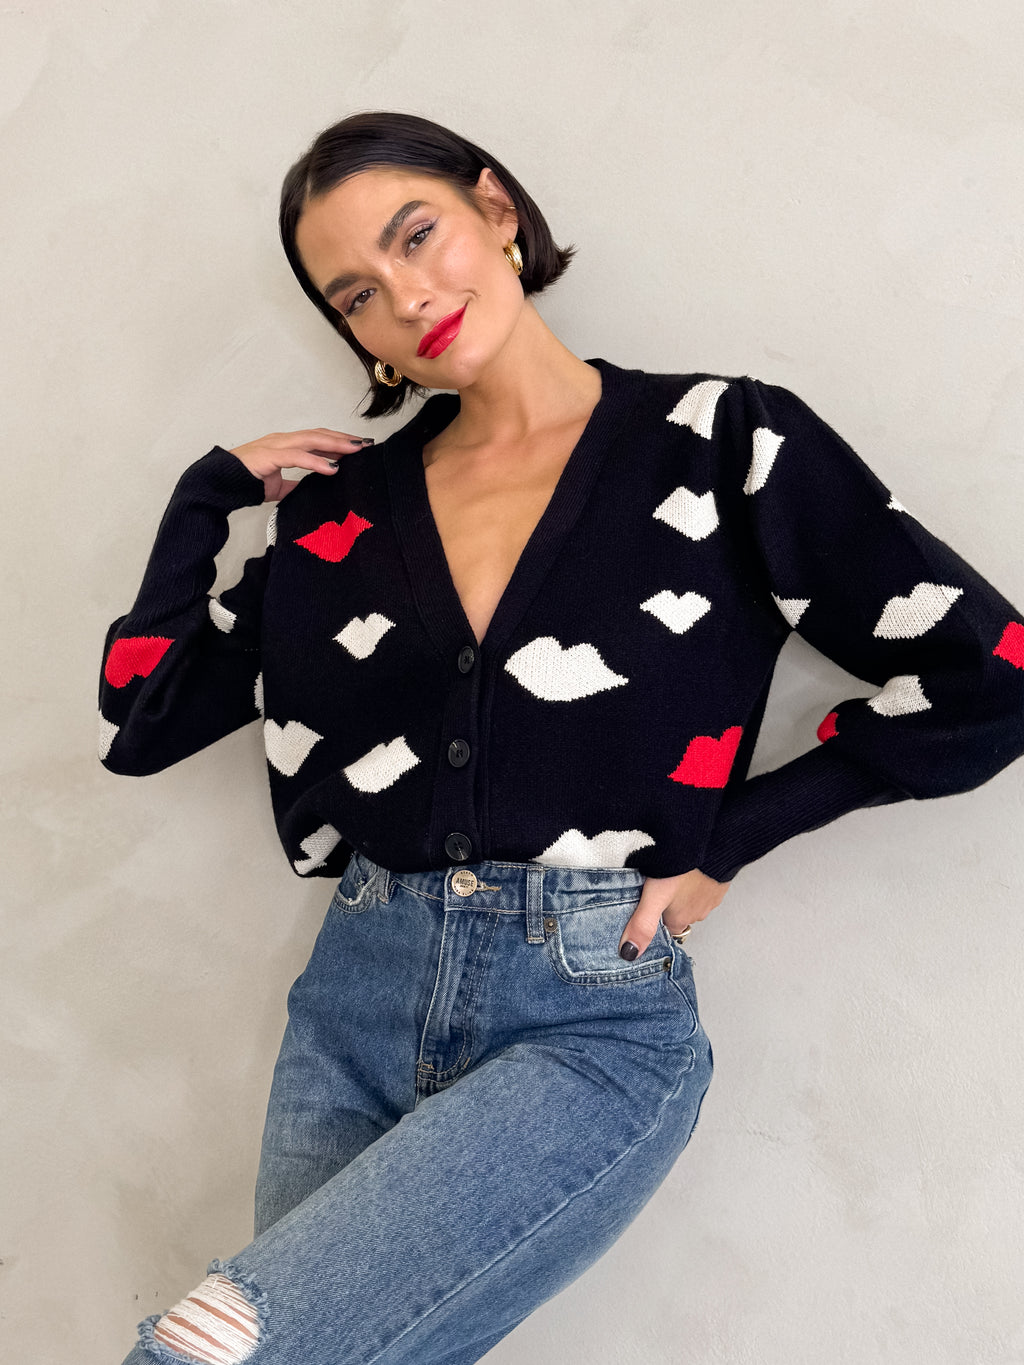 Kiss Me Knit Sweater - Stitch And Feather